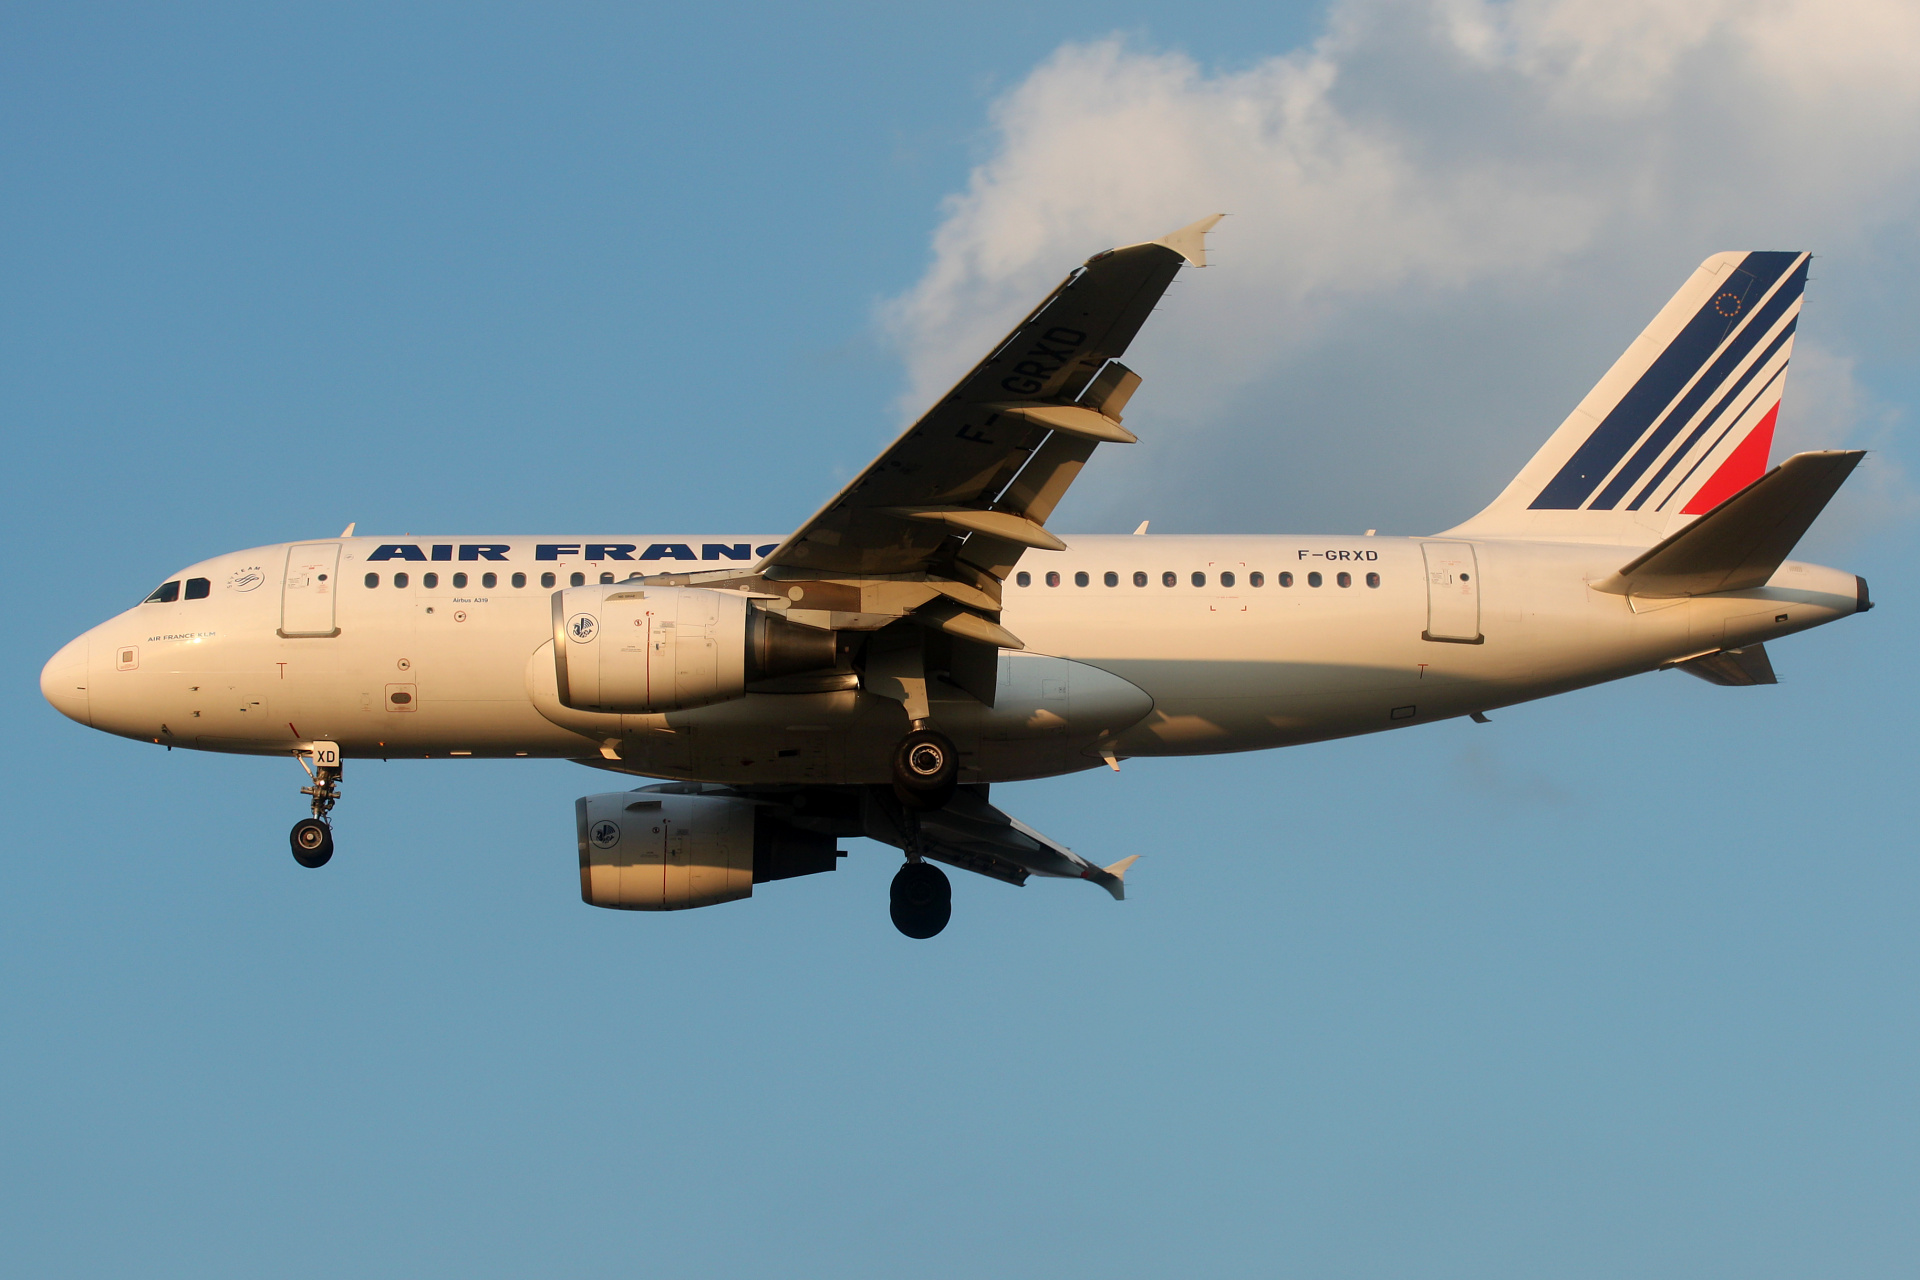 F-GRXD (Aircraft » EPWA Spotting » Airbus A319-100 » Air France)